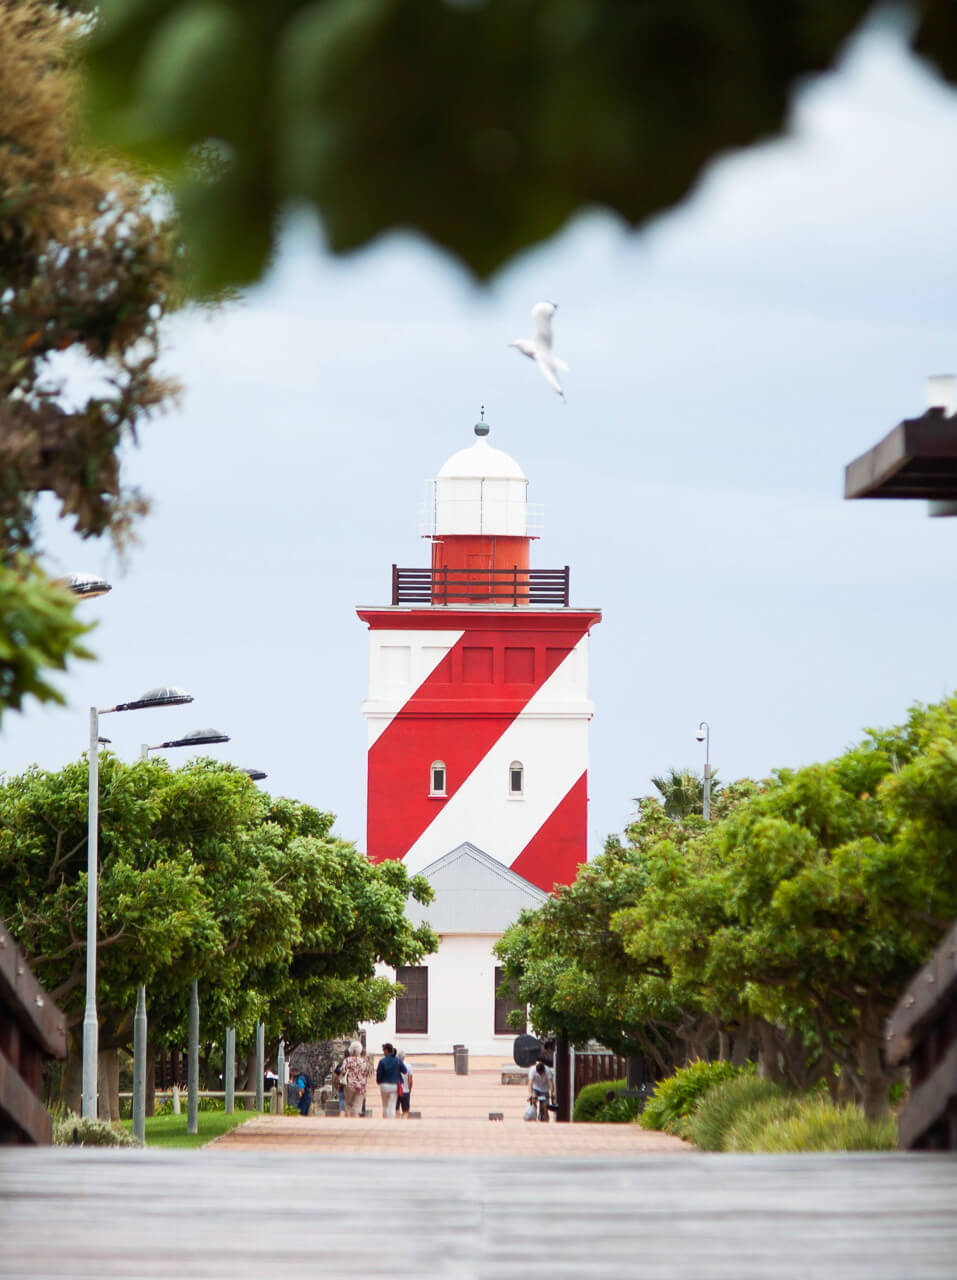 Things to do in Cape Town - go for a run around Green Point Park